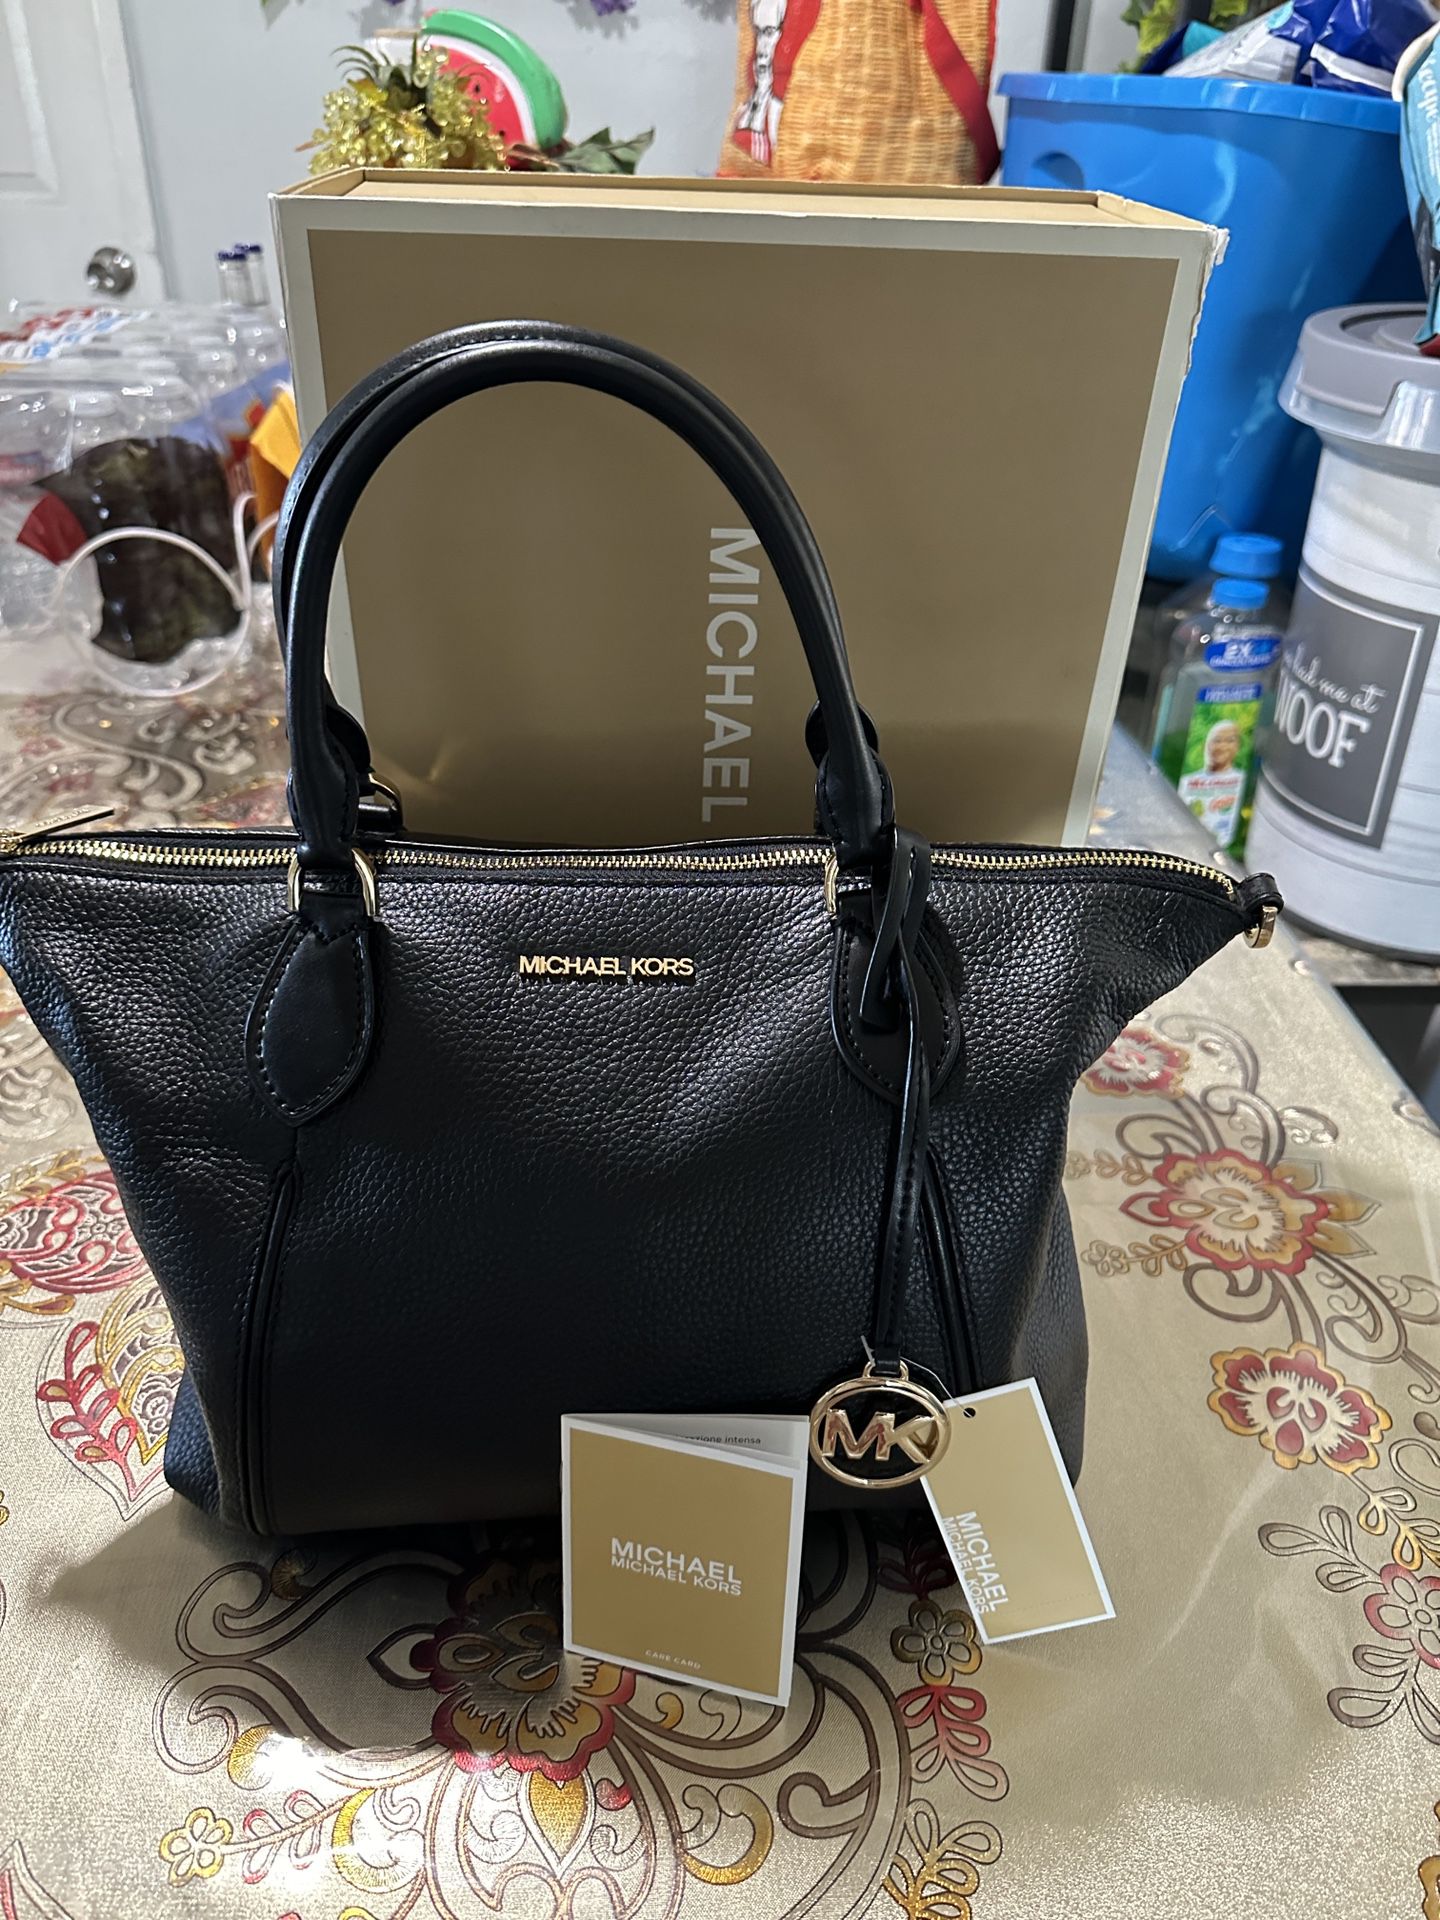 Michael Kors Purse Brand New With Box Authentic